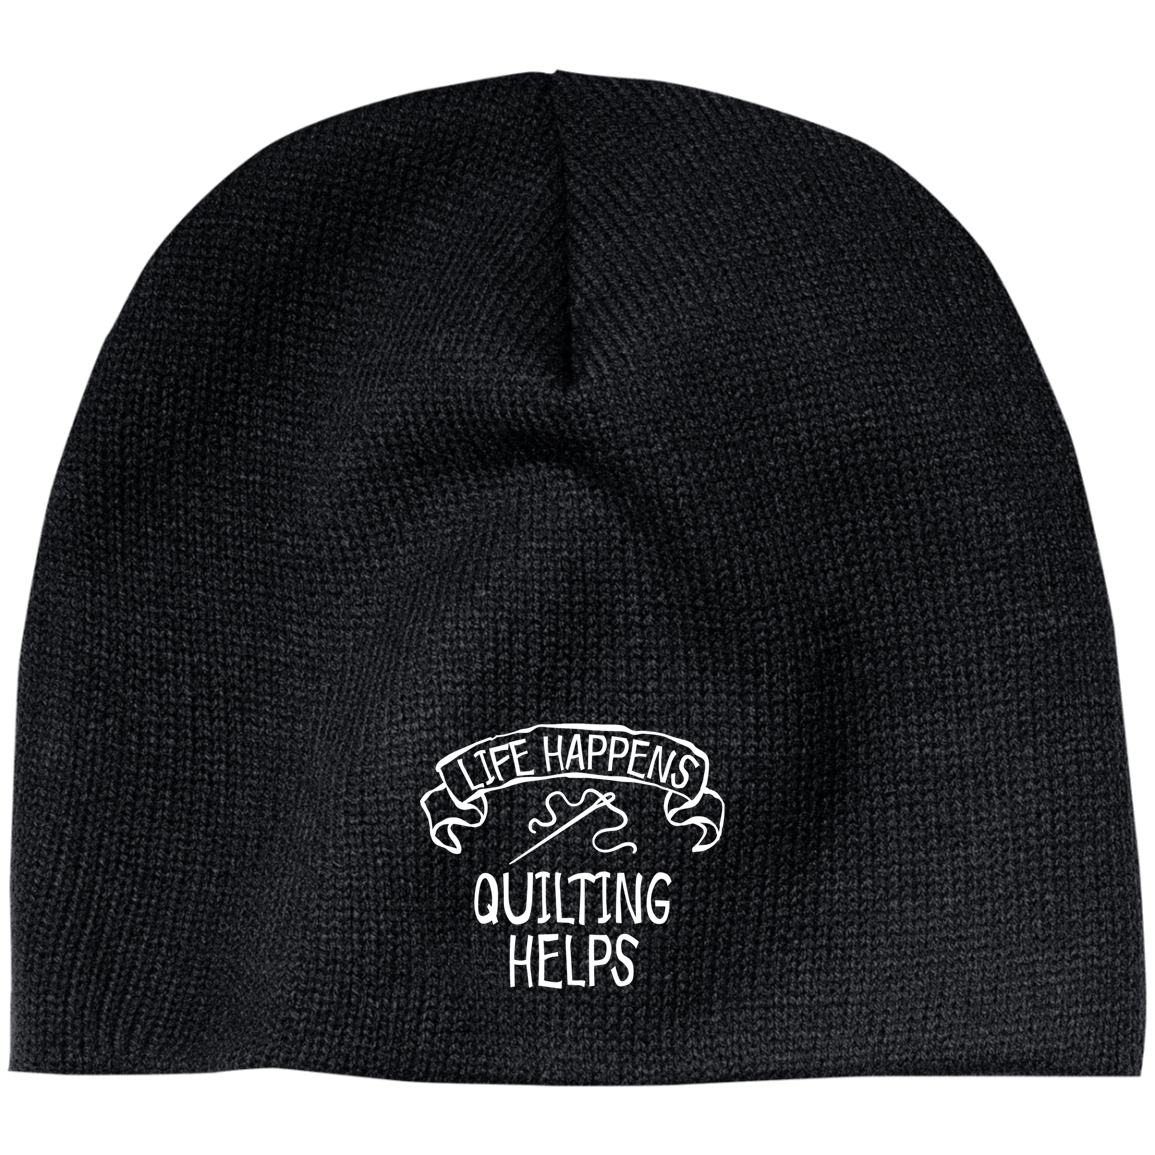 Life Happens - Quilting Helps 100% Acrylic Beanie